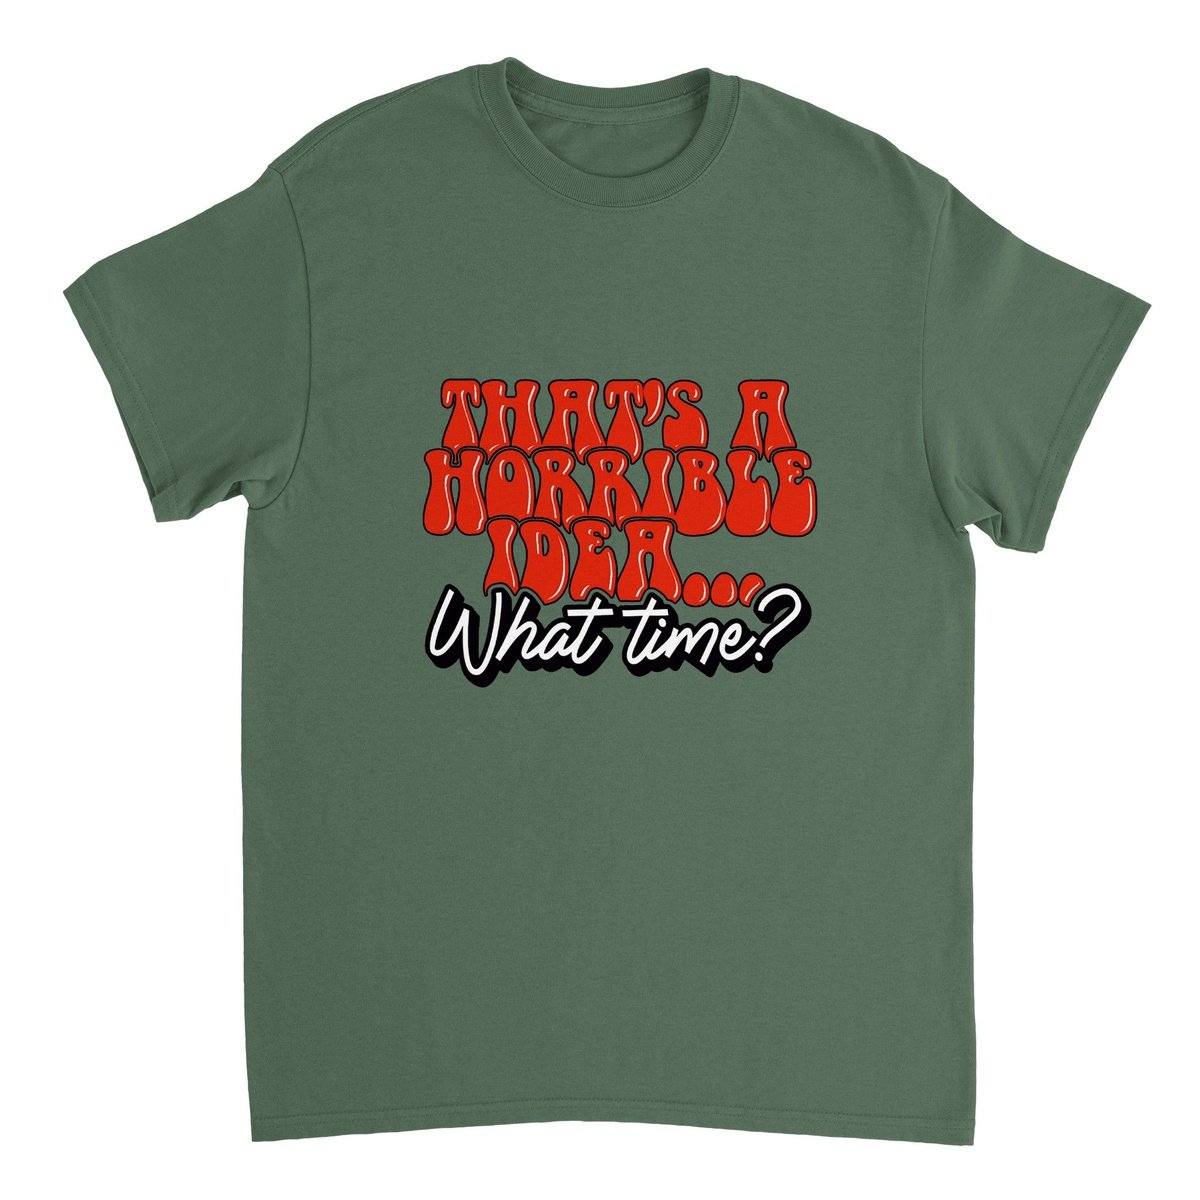 Thats A Horrible Idea What Time? T-SHIRT Australia Online Color Military Green / S